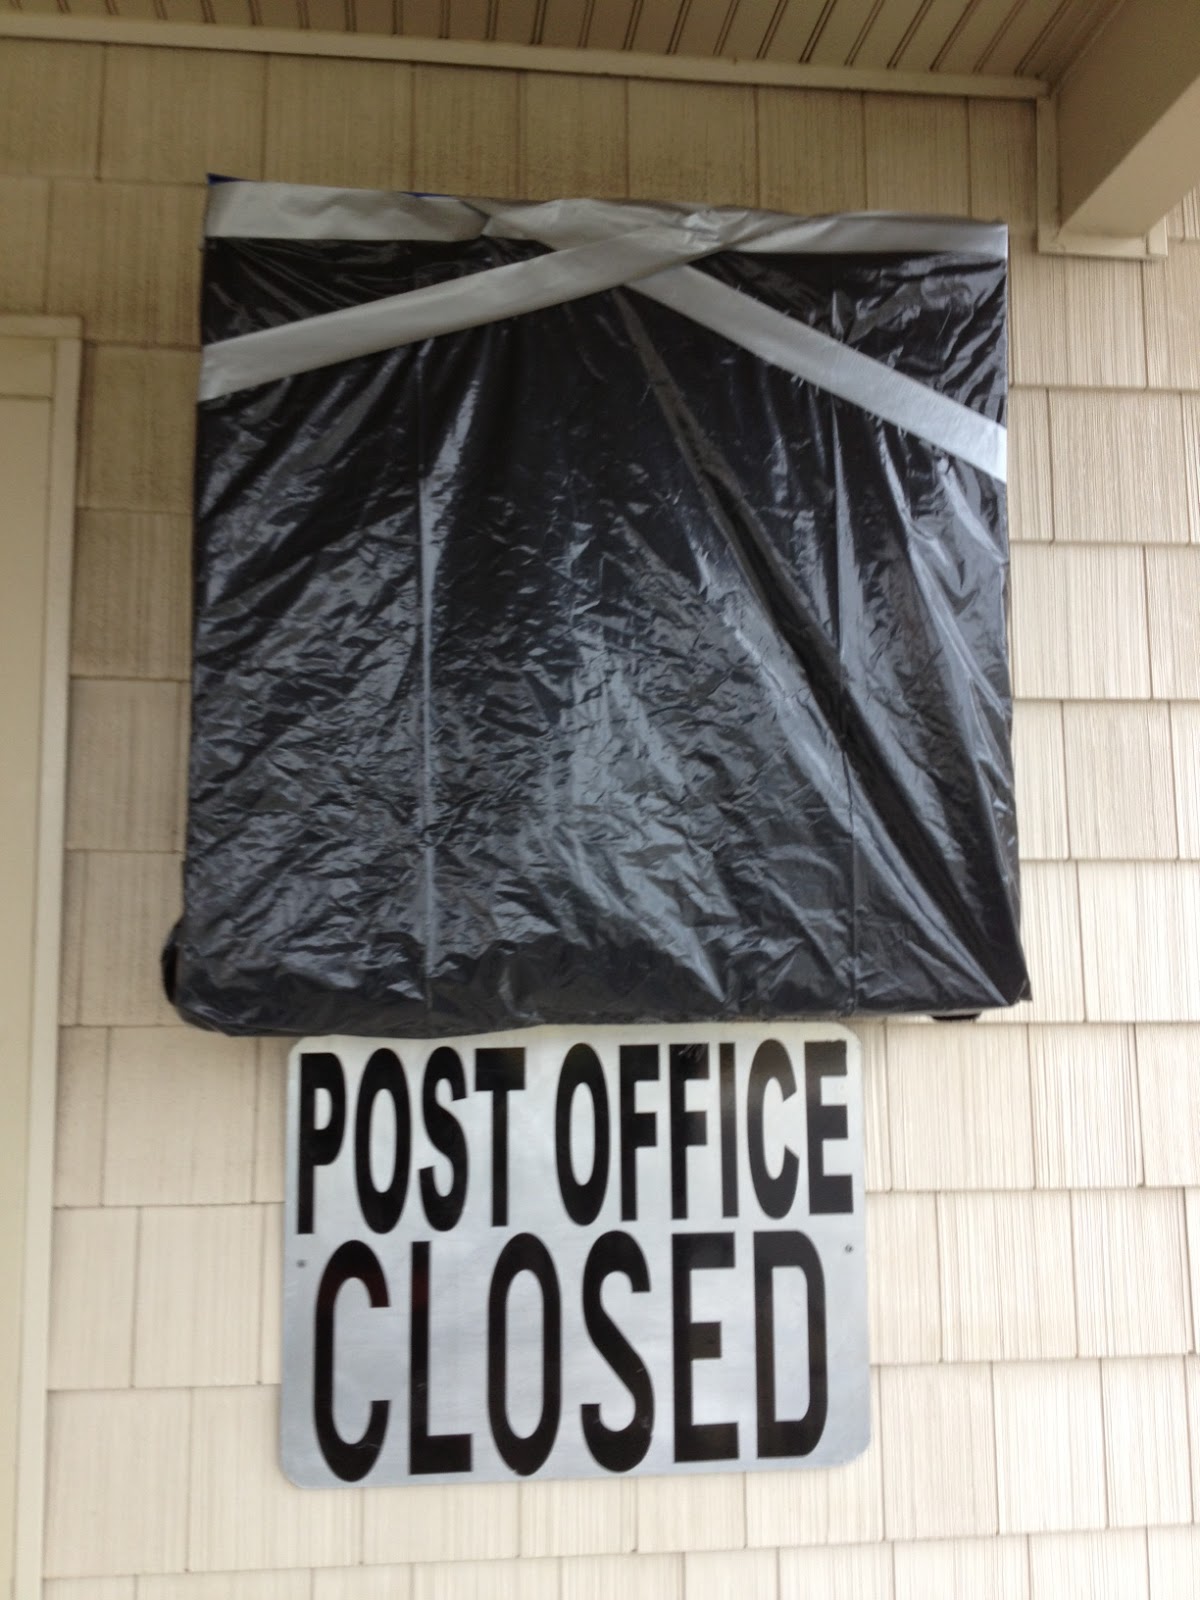 Galloway Township Closed Post Office Located at the Municipal Complex